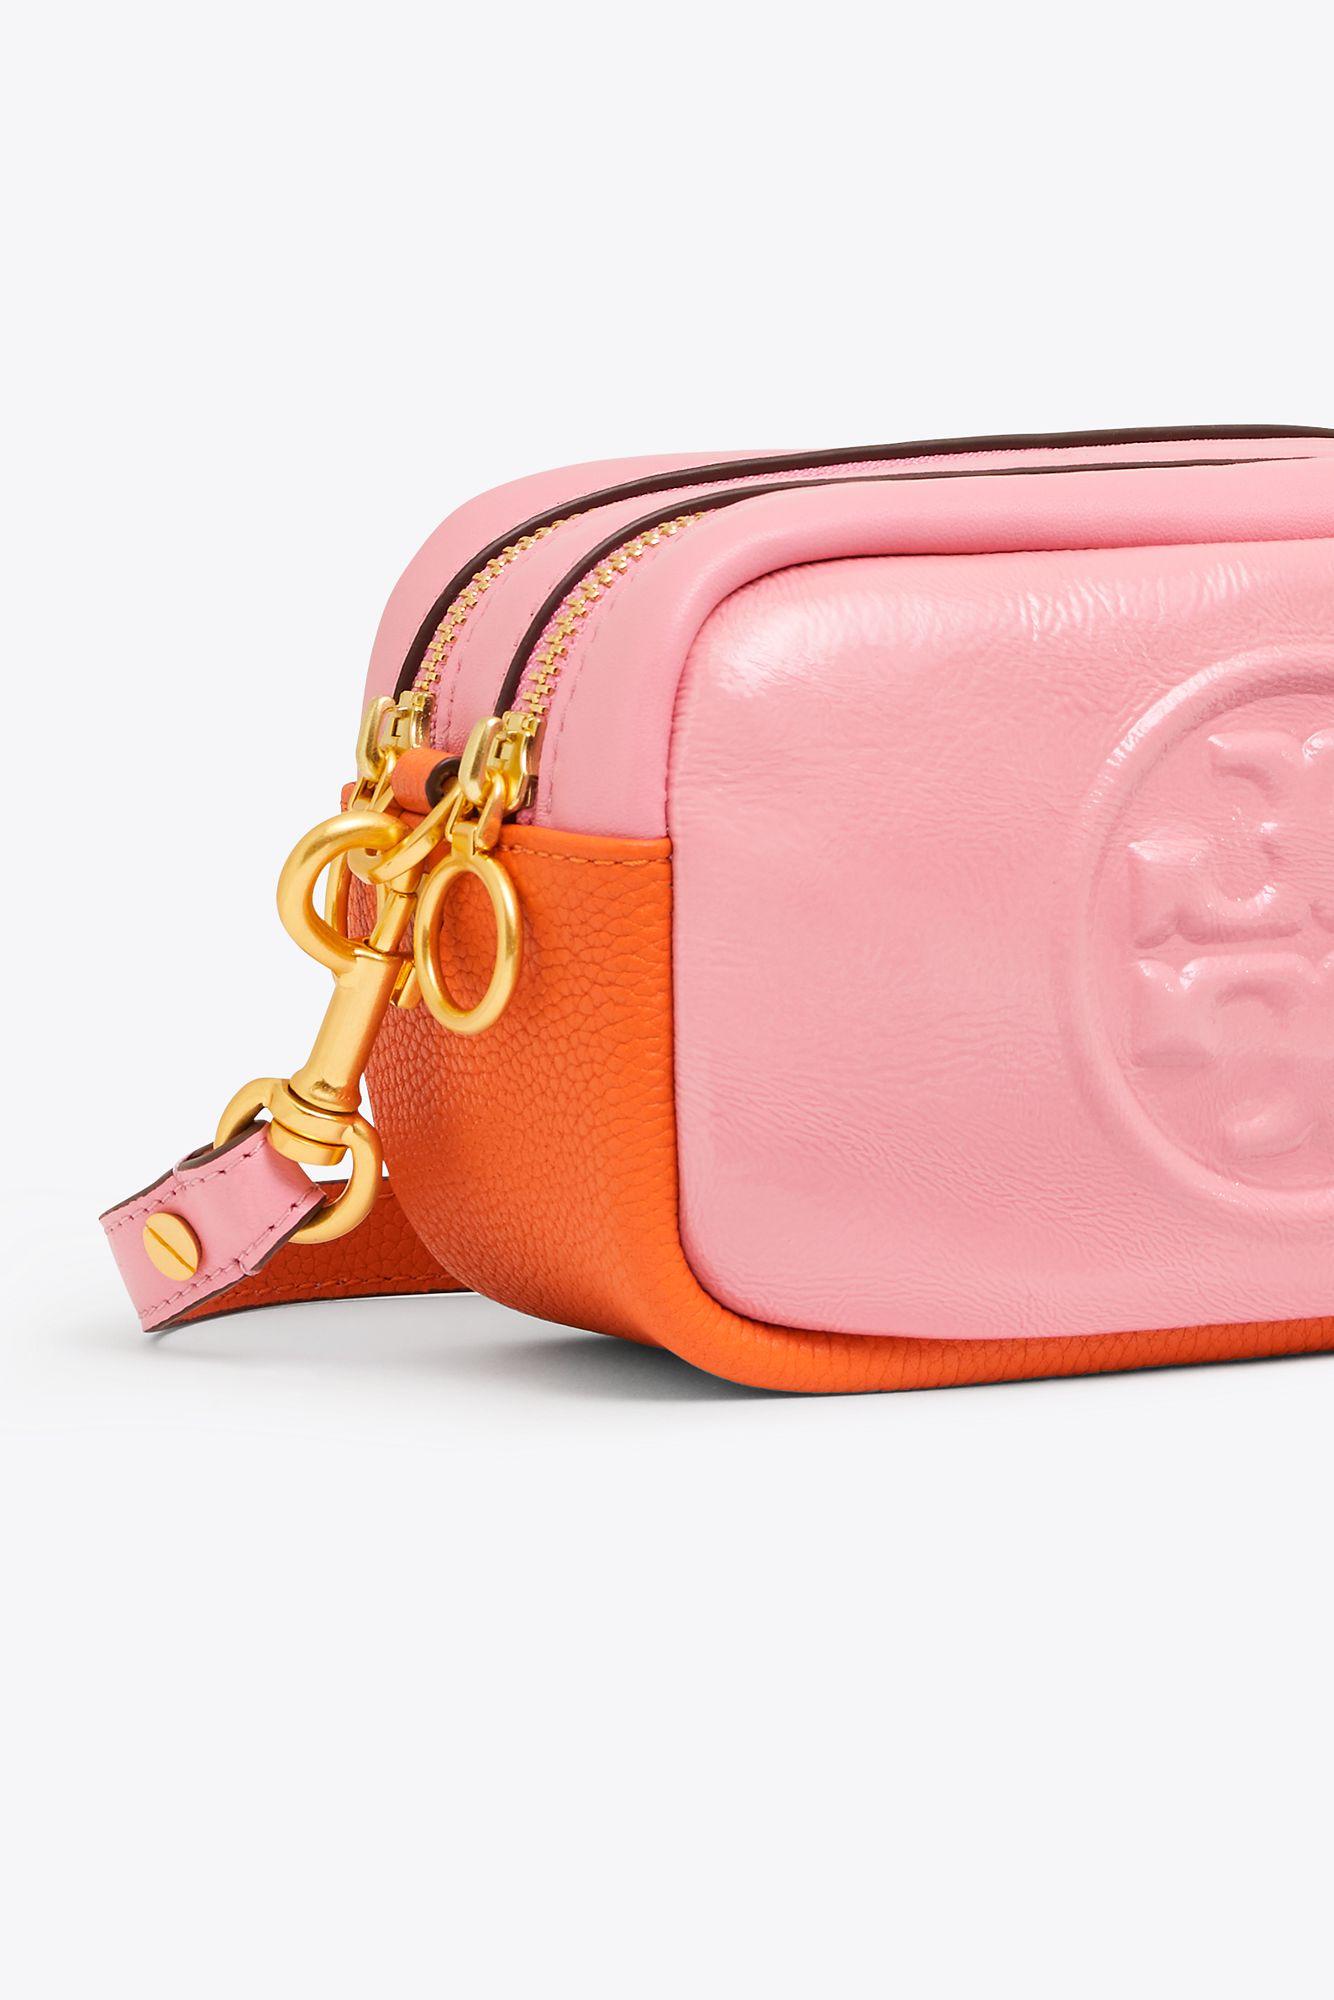 Tory Burch Leather Perry Bombe Color-block Mini Bag in Pink - Lyst